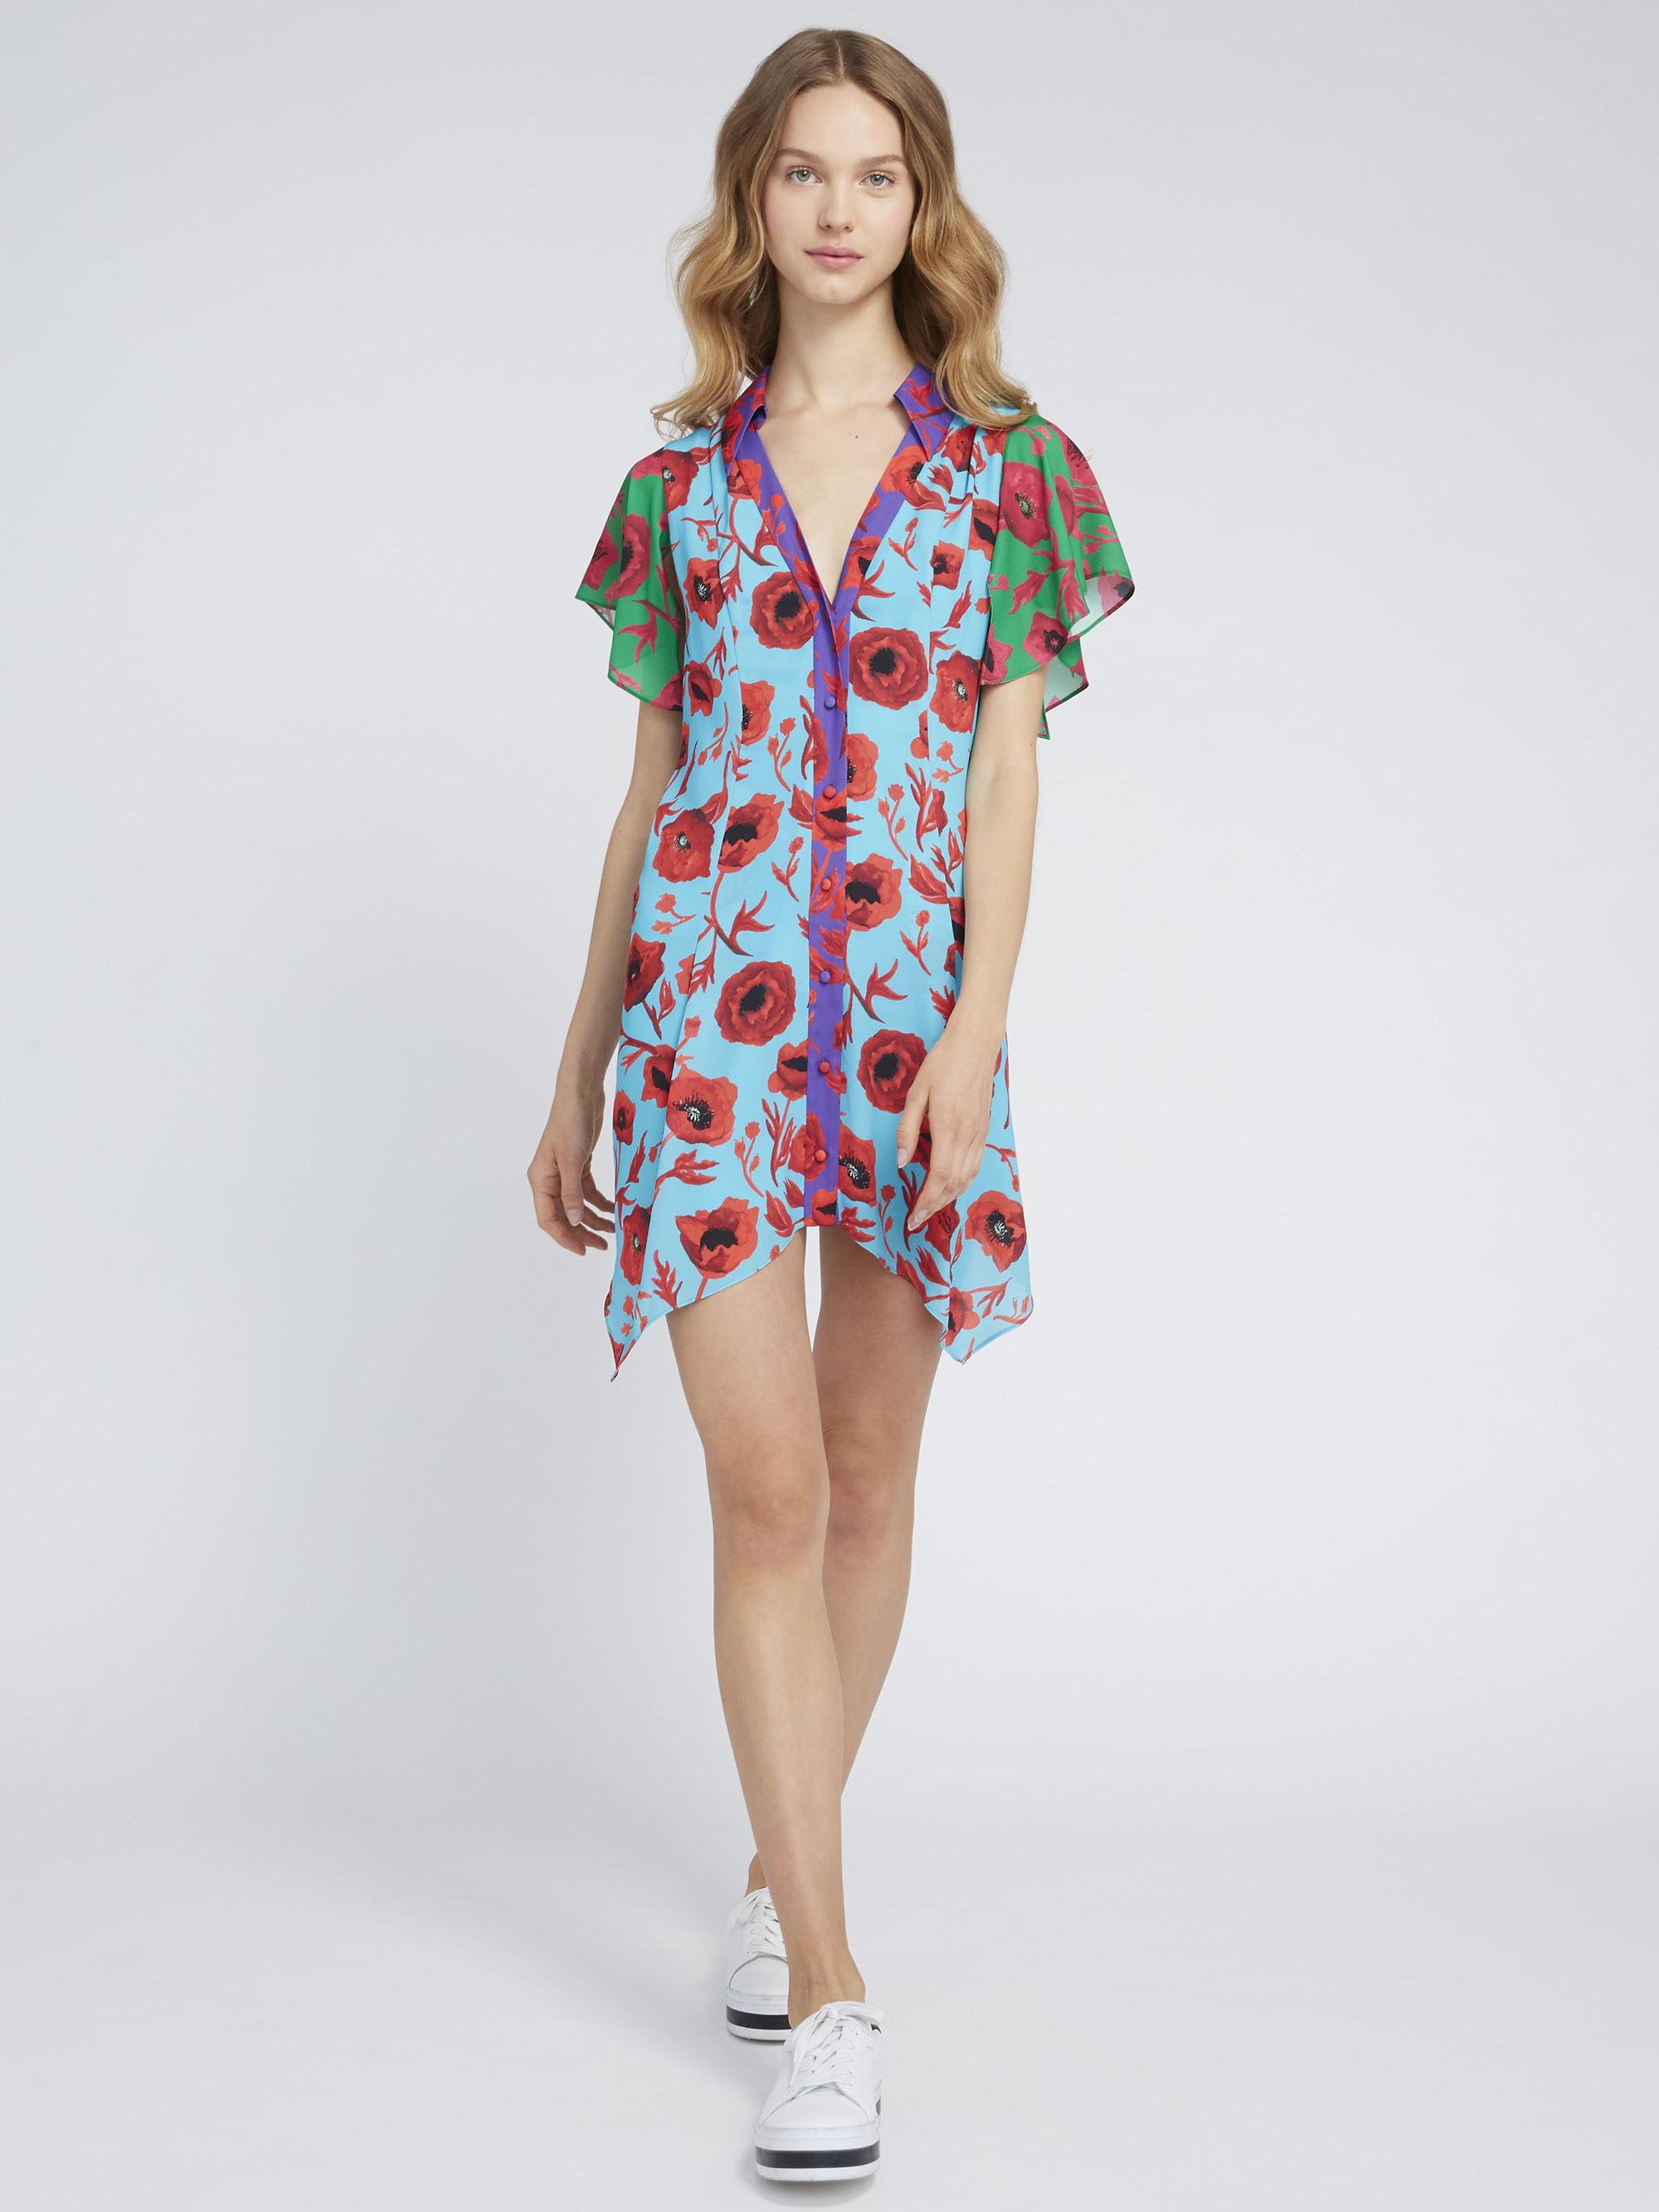 Alice + Olivia Synthetic Conner Floral Mini Dress in Blue - Lyst